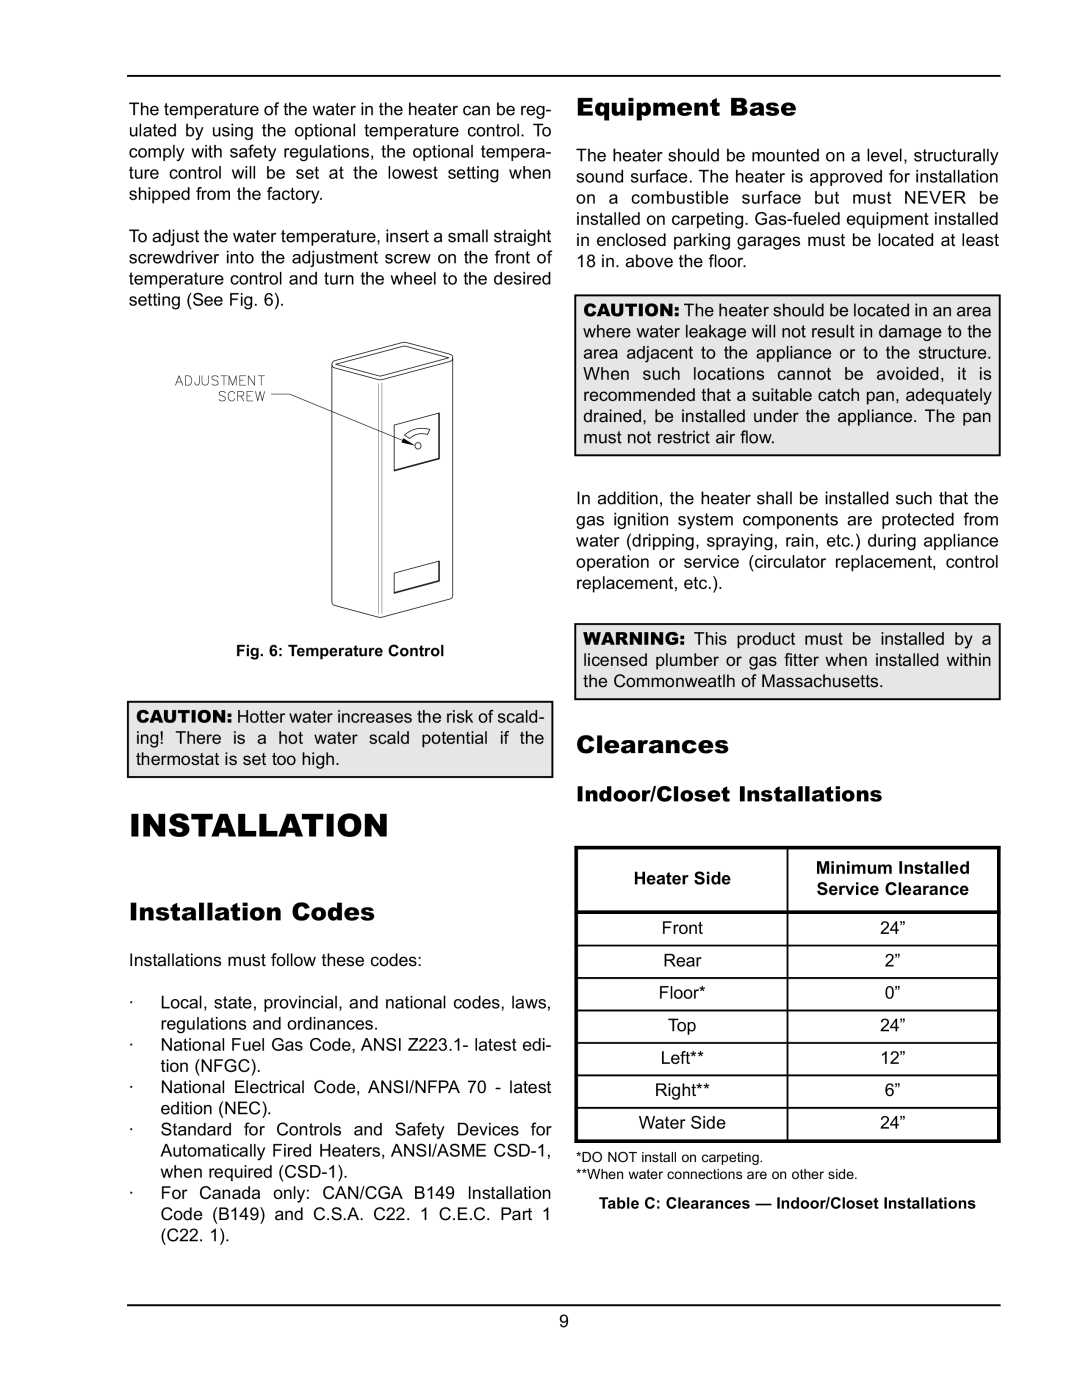 Raypak HD101, HD401 operating instructions Installation Codes, Equipment Base, Clearances, Indoor/Closet Installations 